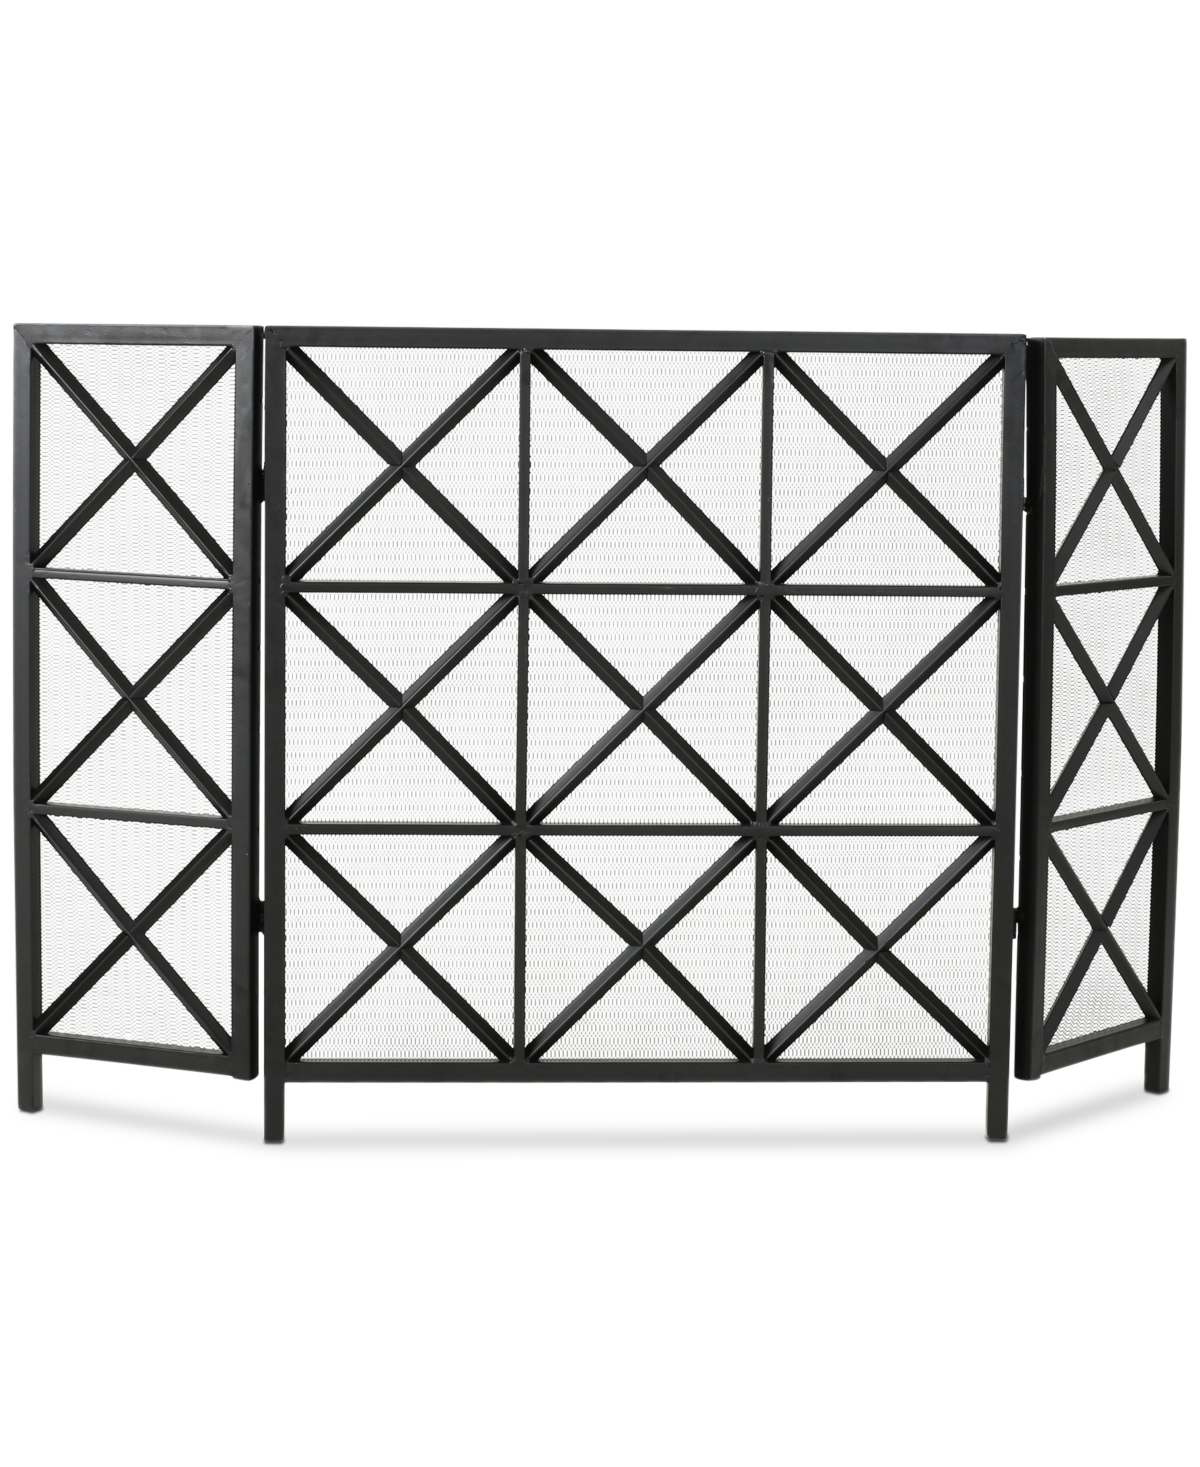 Noble House Three Panel Fireplace Screen In Black